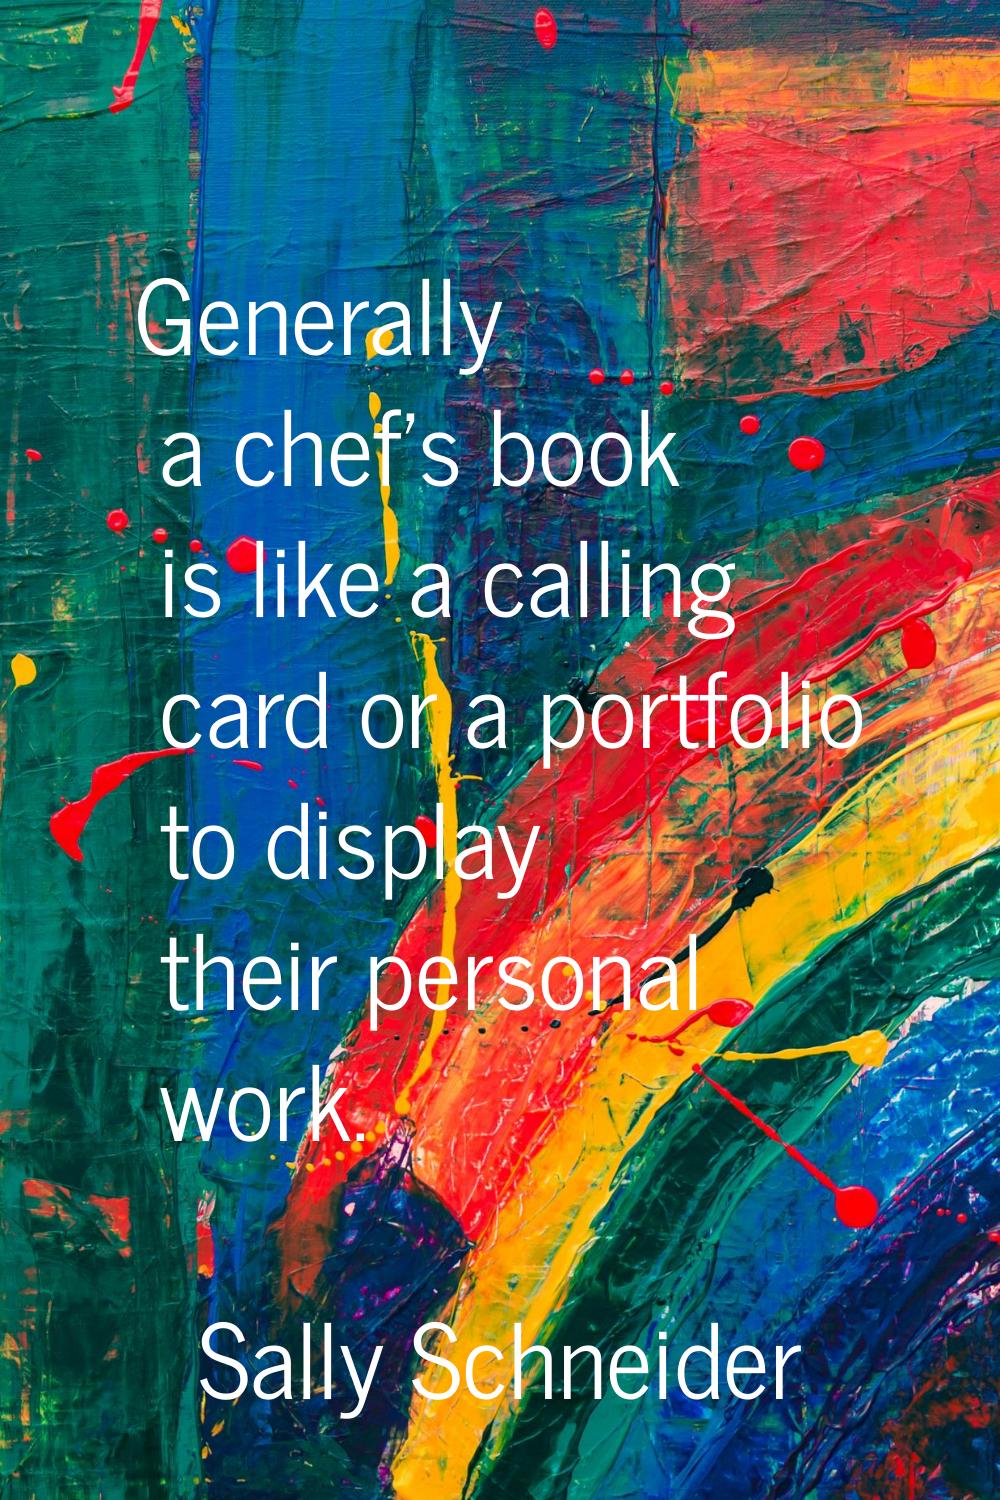 Generally a chef's book is like a calling card or a portfolio to display their personal work.